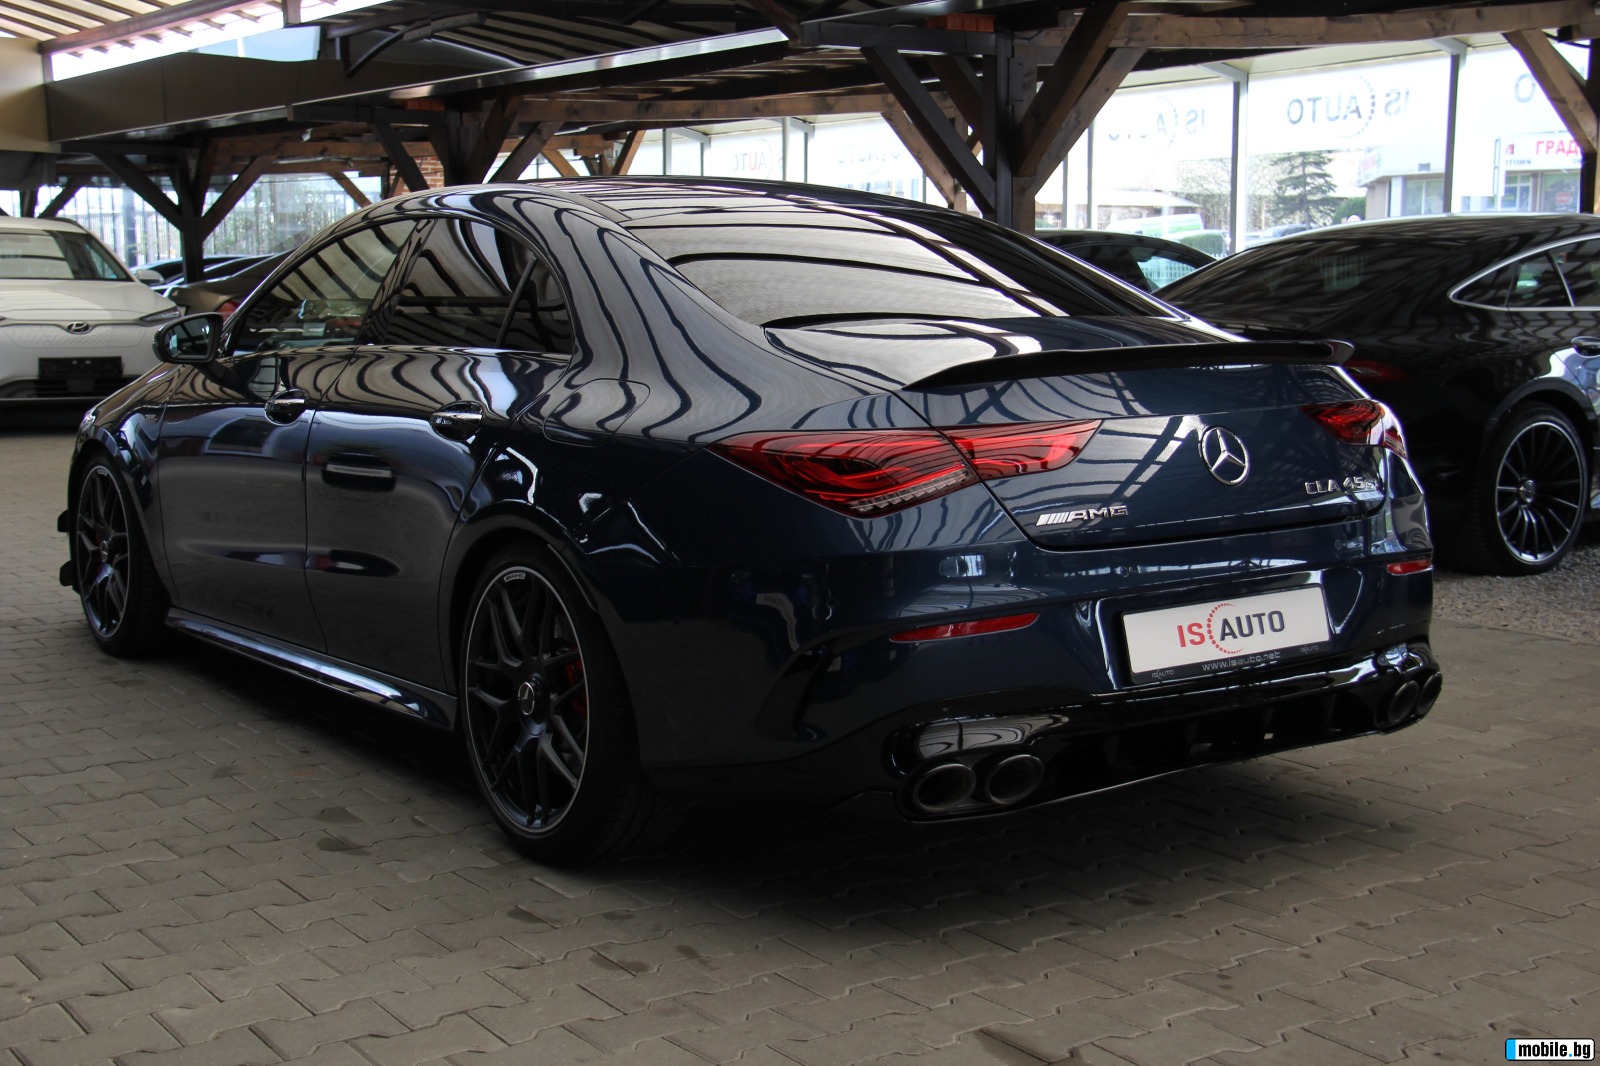 Mercedes-Benz CLA 45 AMG S/performance//Ambient/4Matic | Mobile.bg   6